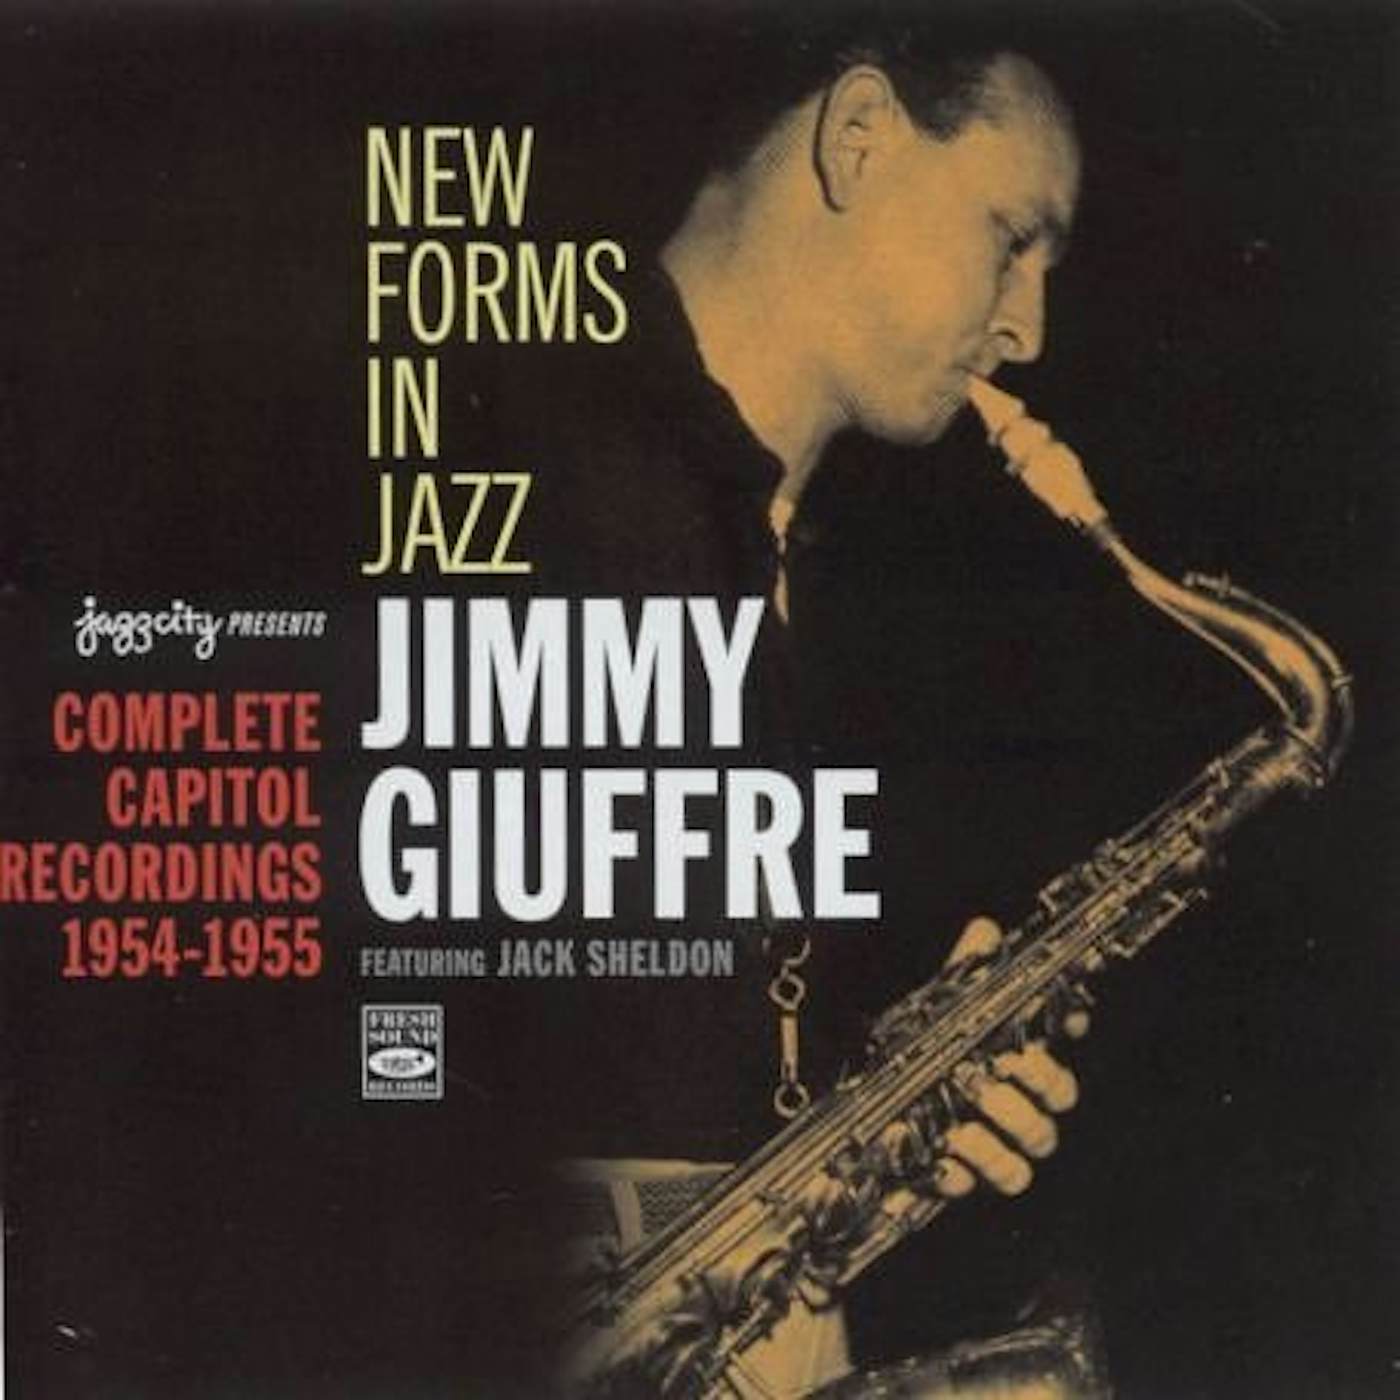 Jimmy Giuffre NEW FORMS IN JAZZ: COMPLETE CAPITOL 1954-1955 CD